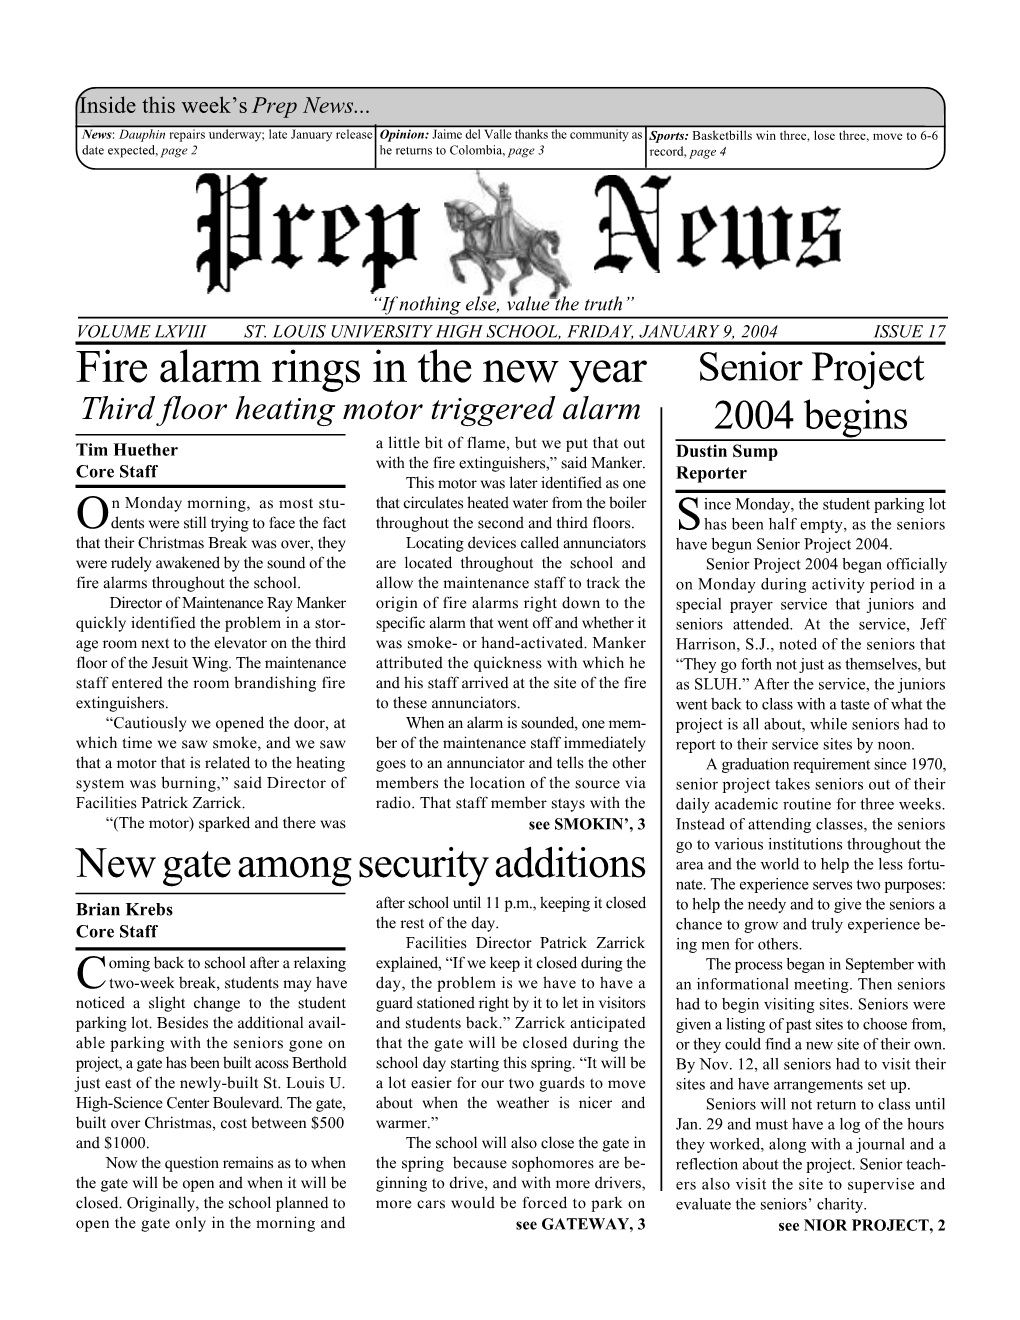 Fire Alarm Rings in the New Year